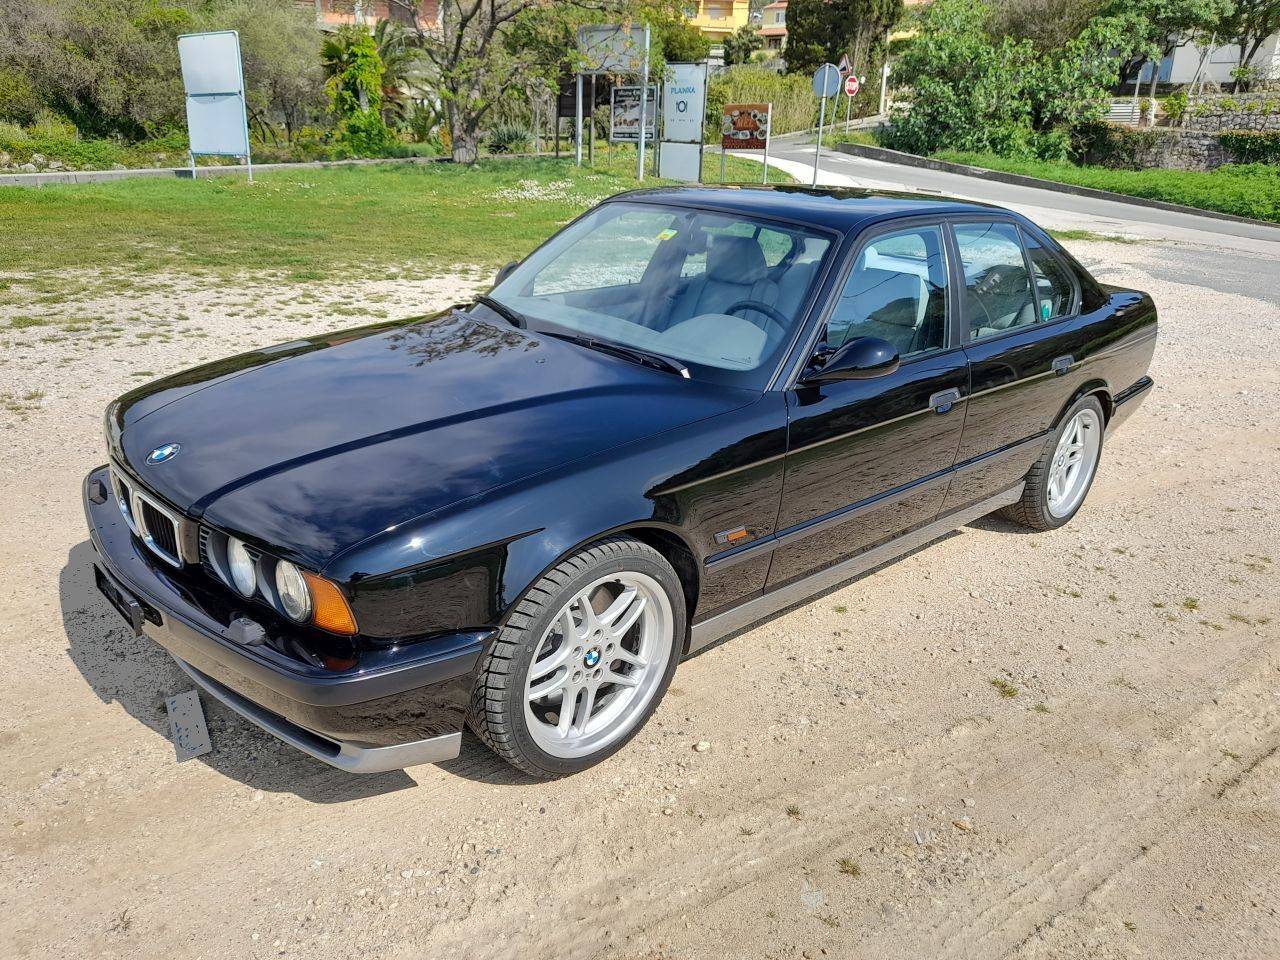 For Sale: Bmw M5 (1995) Offered For £68,487